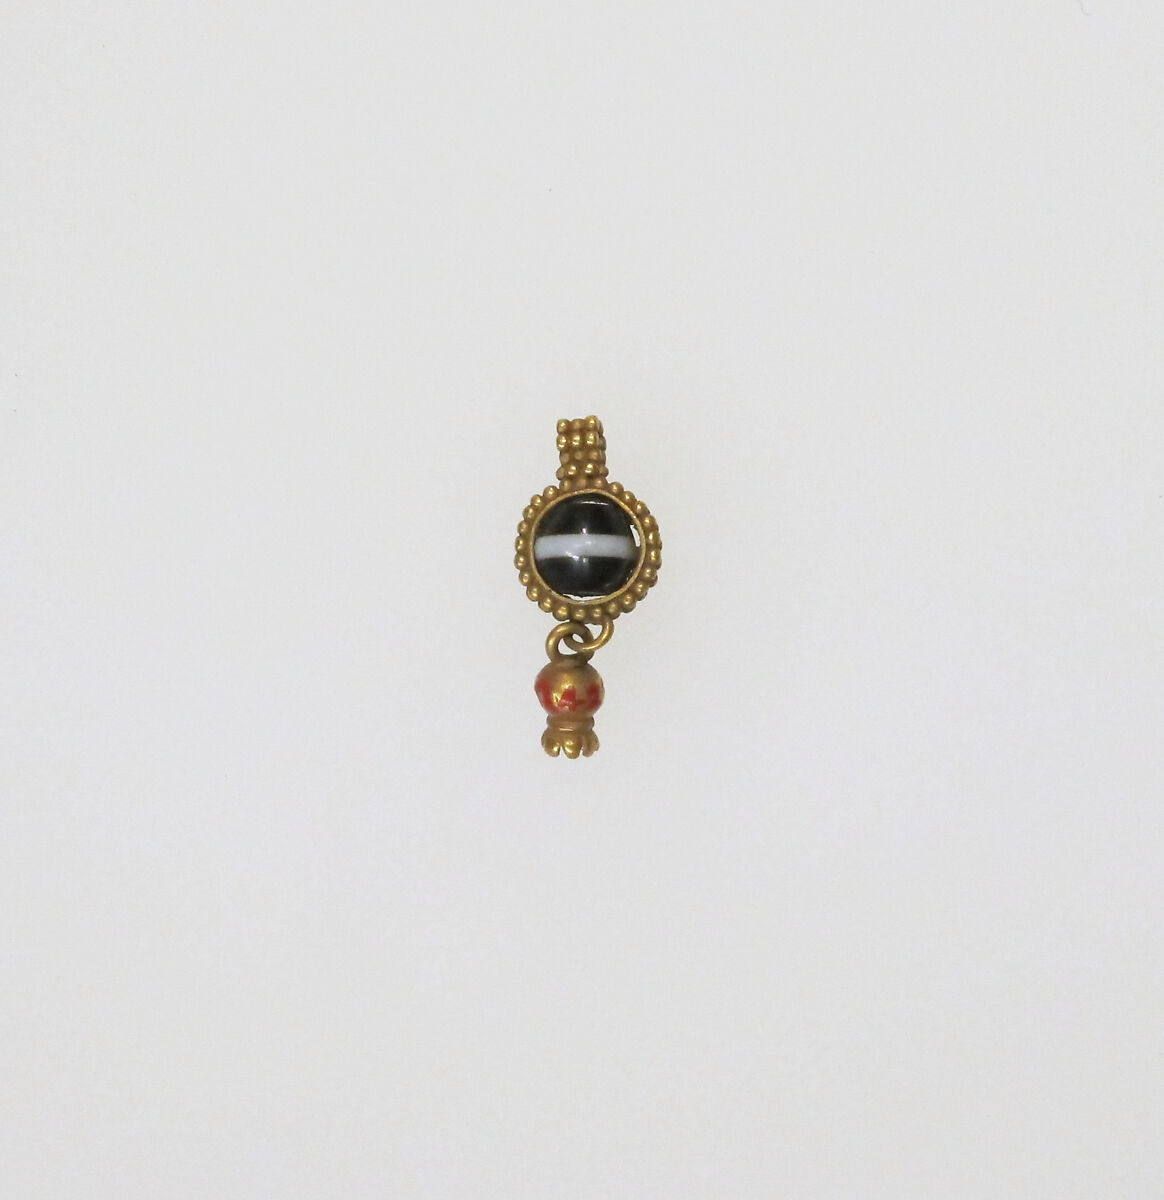 Pendant with pomegranate, Gold, agate 